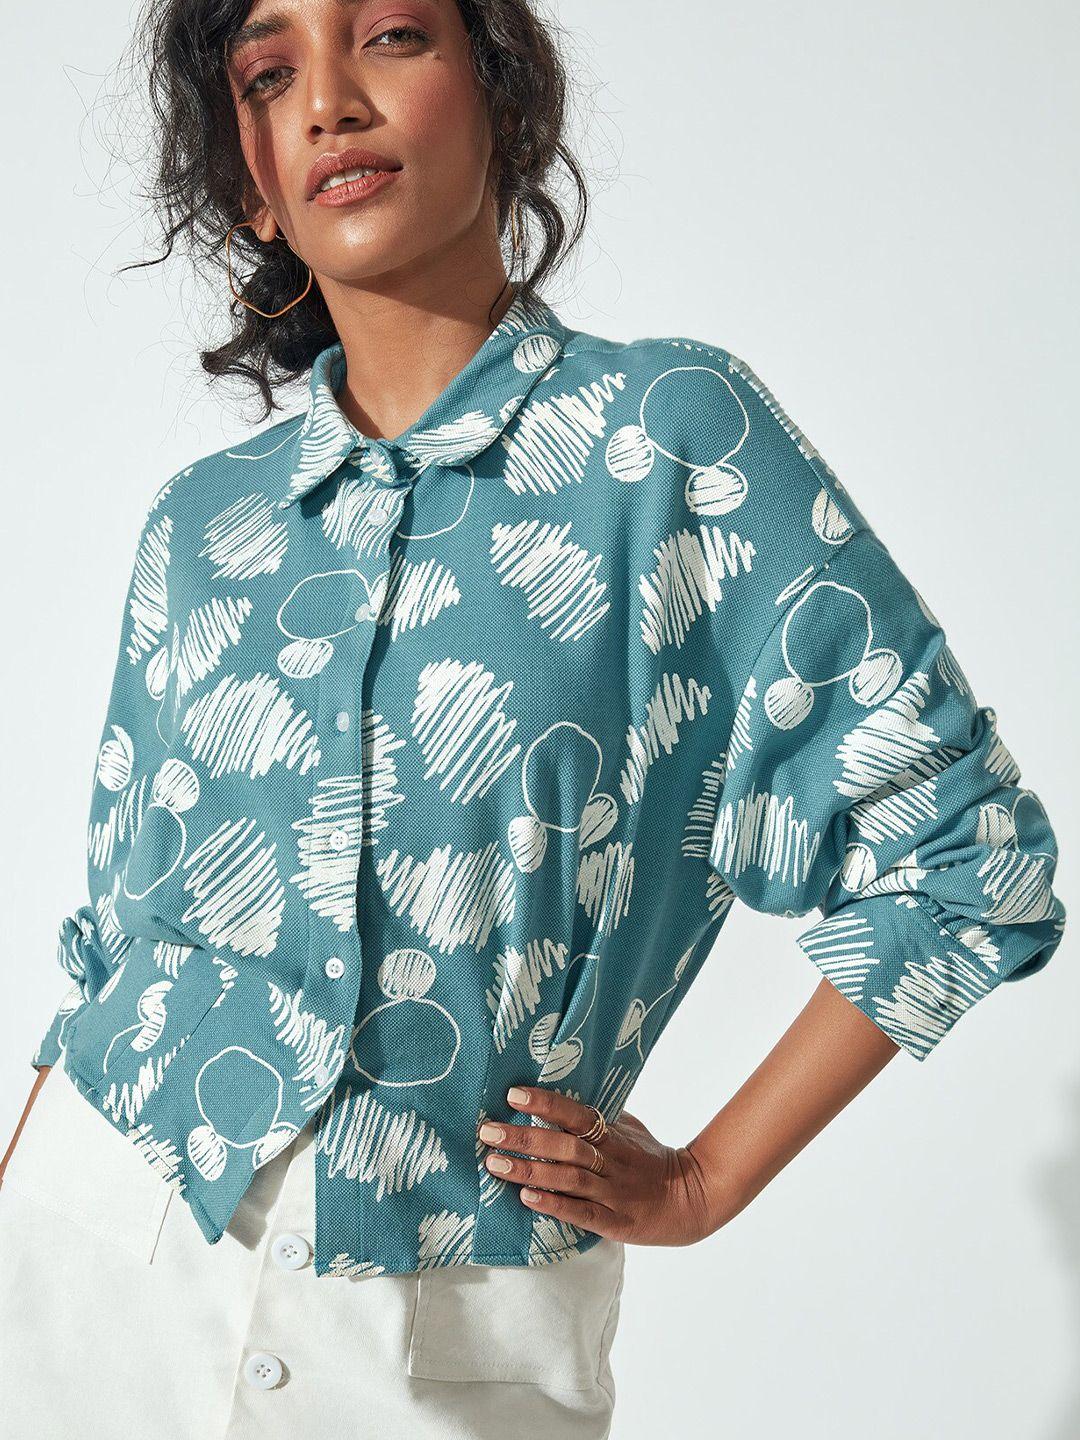 the-label-life-women-blue-abstract-printed-cotton-casual-shirt